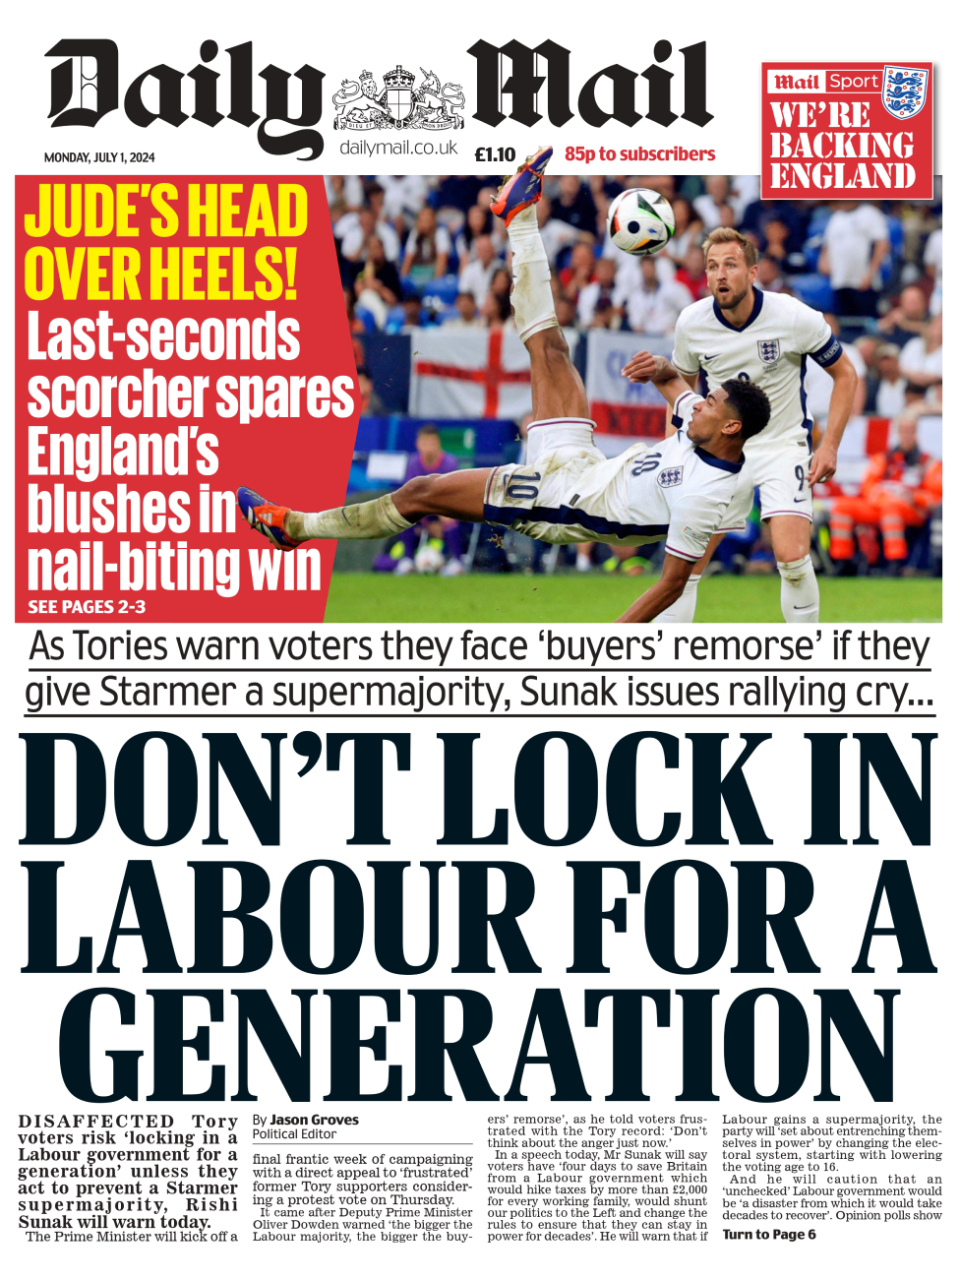 The headline on the front page of the Daily Mail reads: “Don't lock in Labour for a generation"